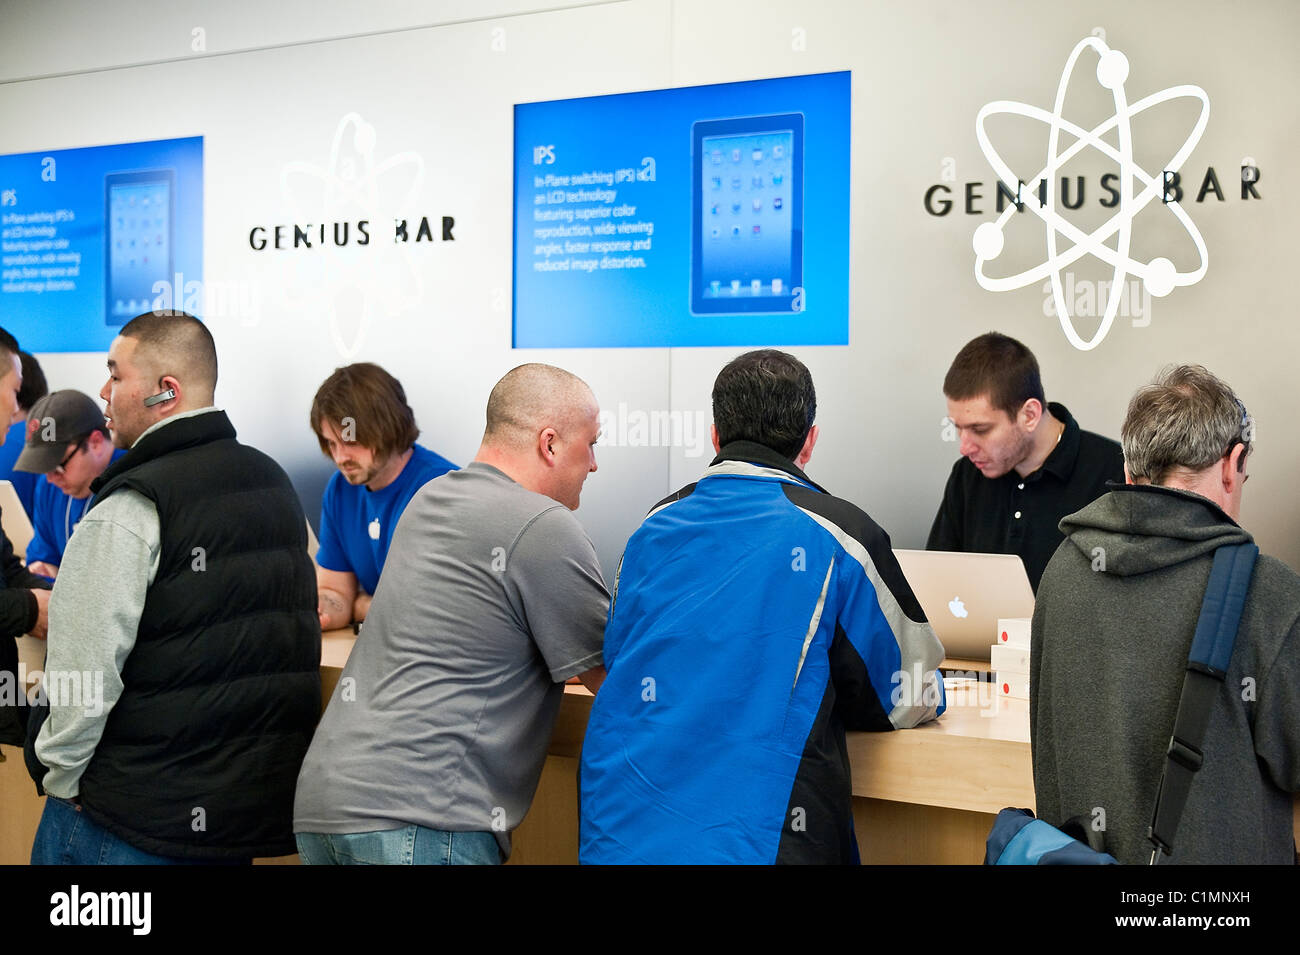 Customers explore the iPad in an Apple store on launch day, Cherry Hill Mall, New Jersey, USA. Stock Photo